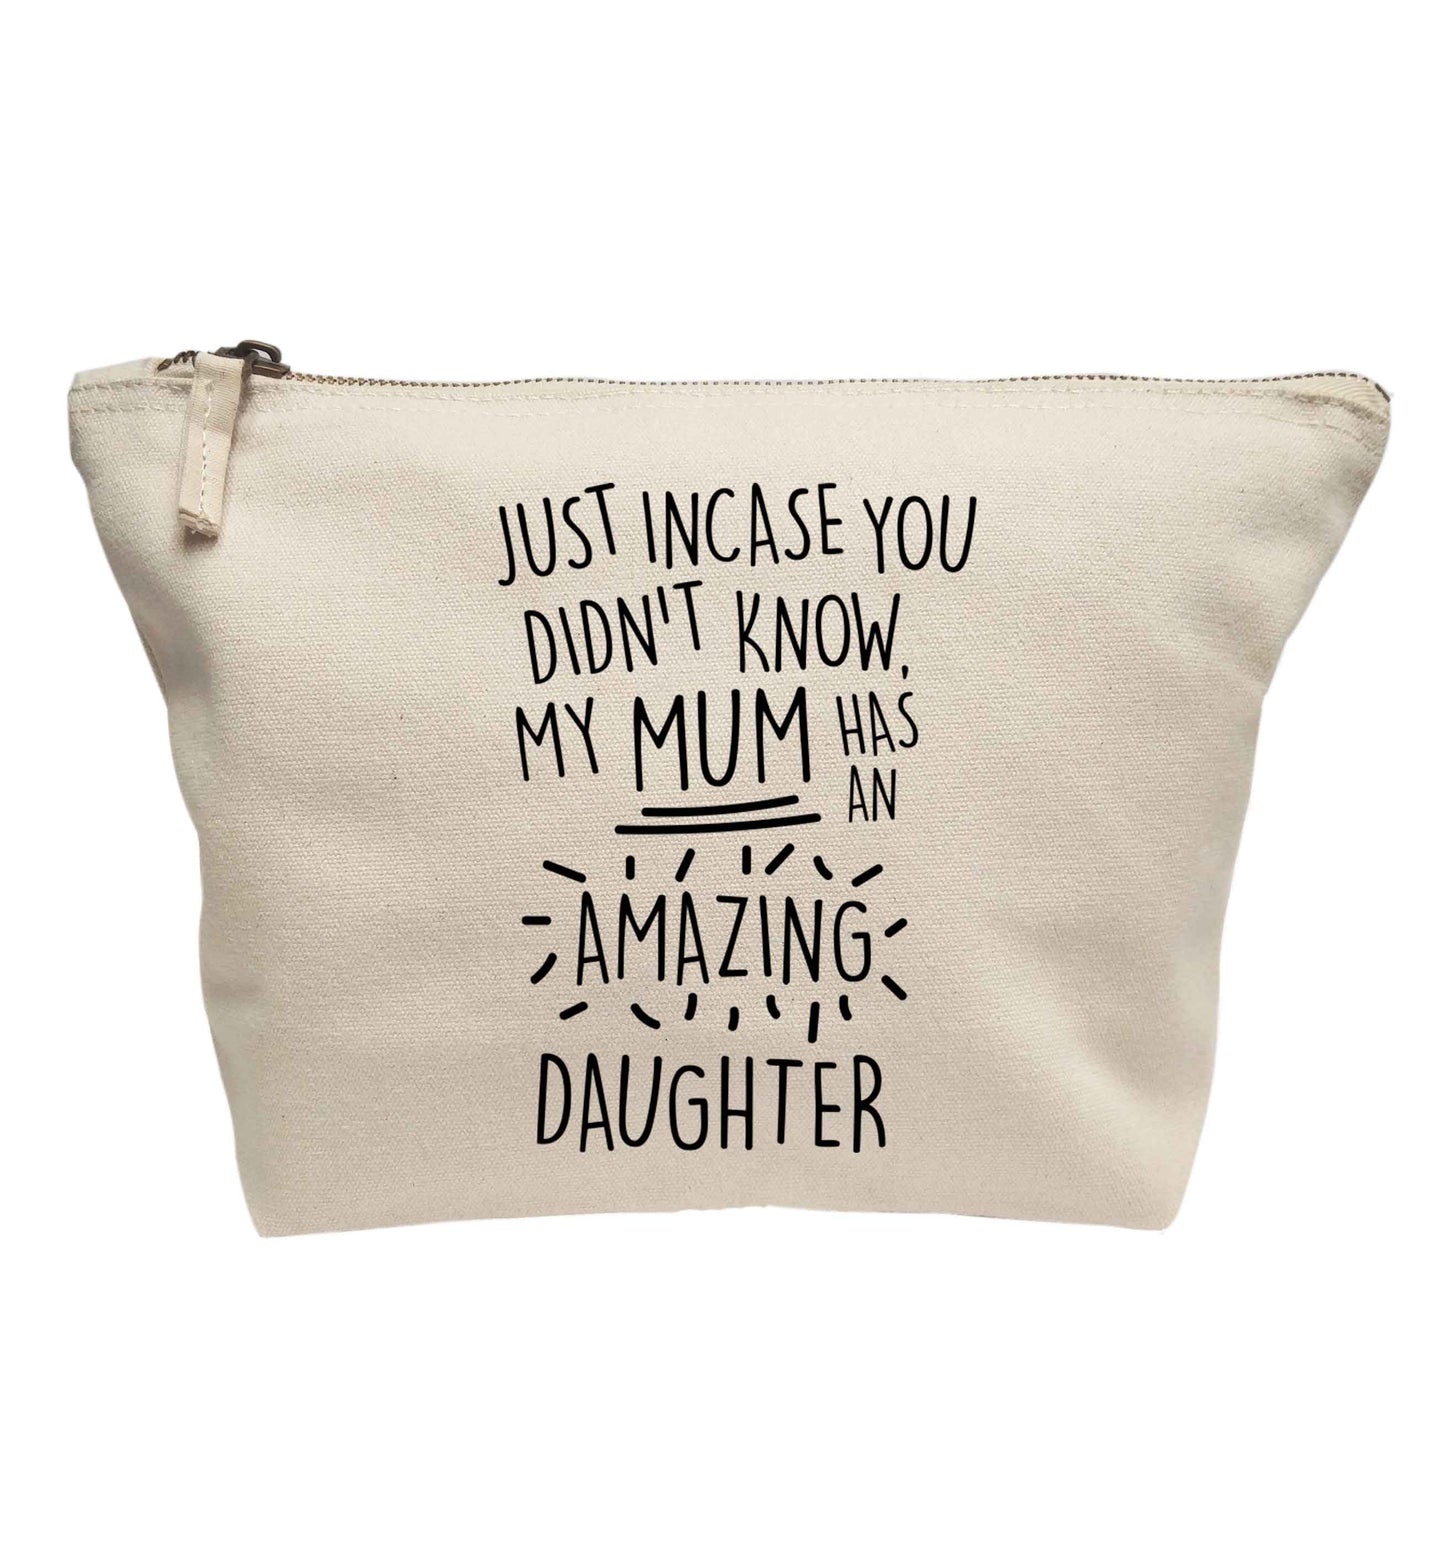 Just incase you didn't know my mum has an amazing daughter | Makeup / wash bag